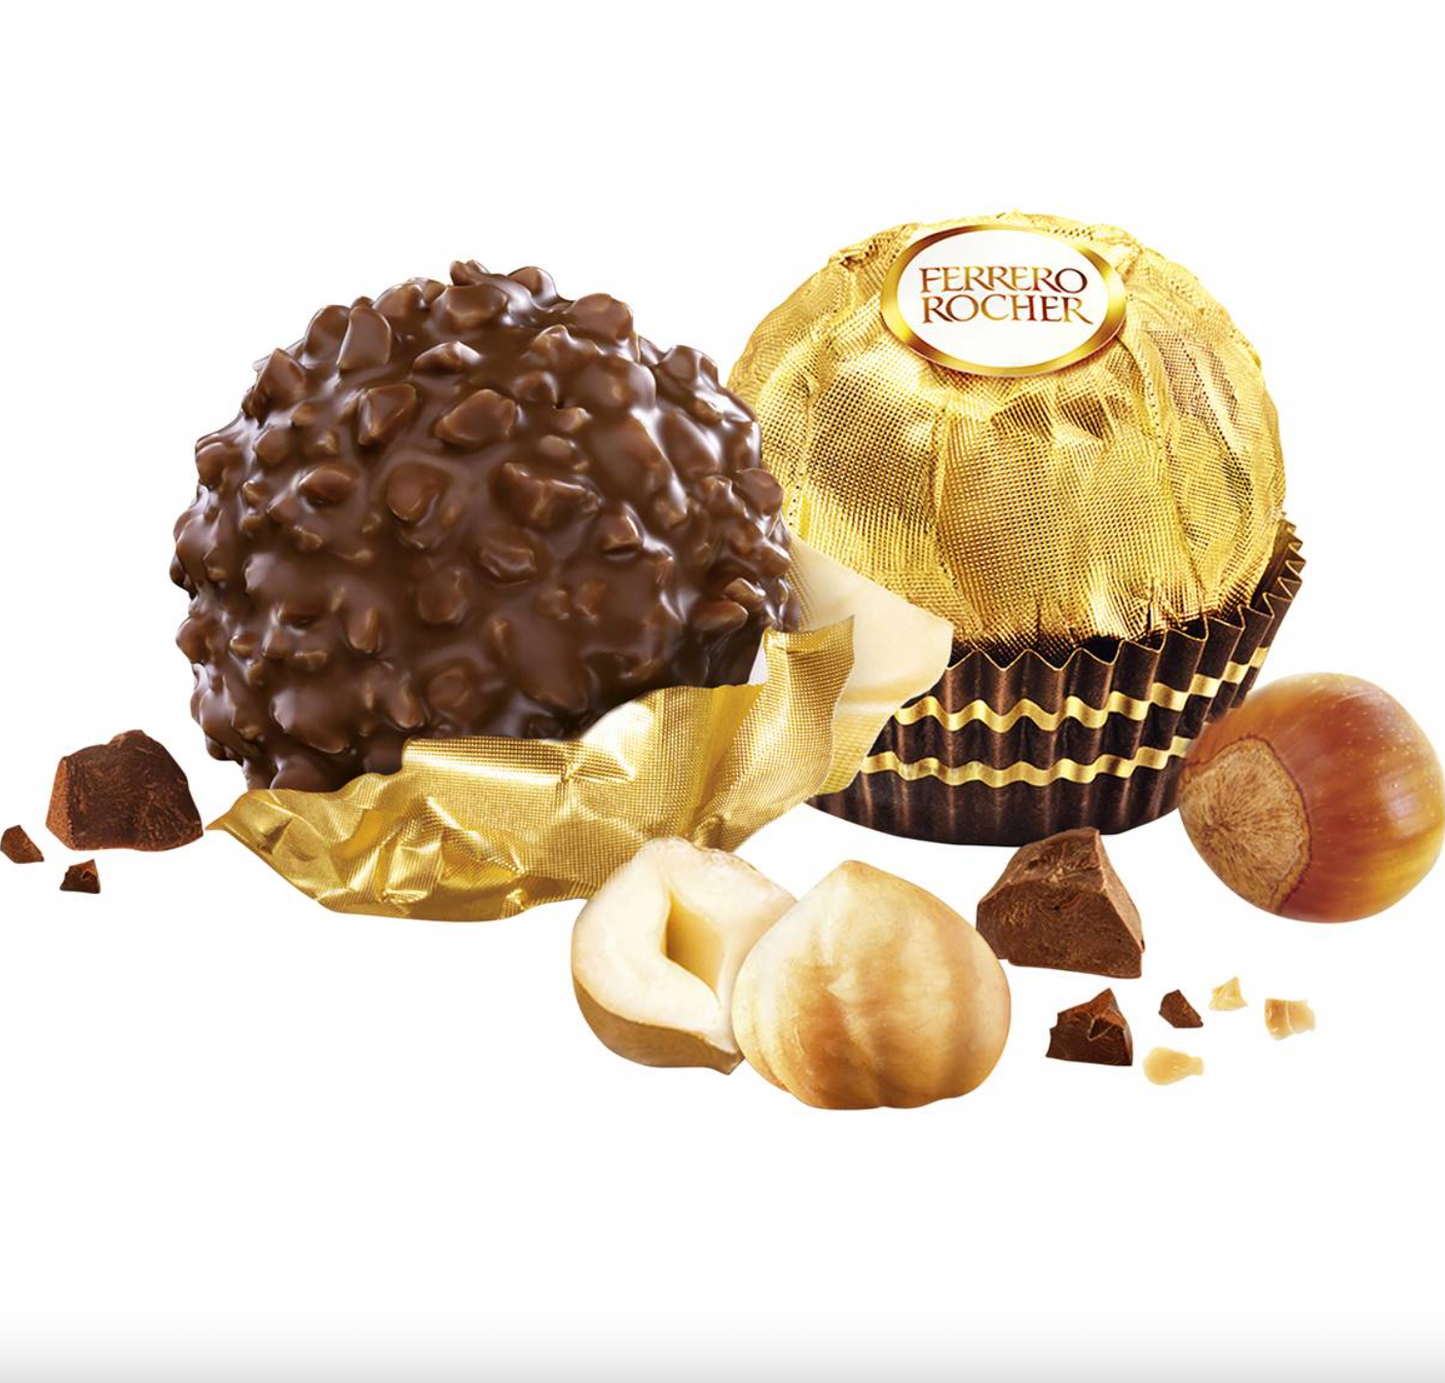 Ferrero Rocher Gift Box (5 pieces) - Add-on Only